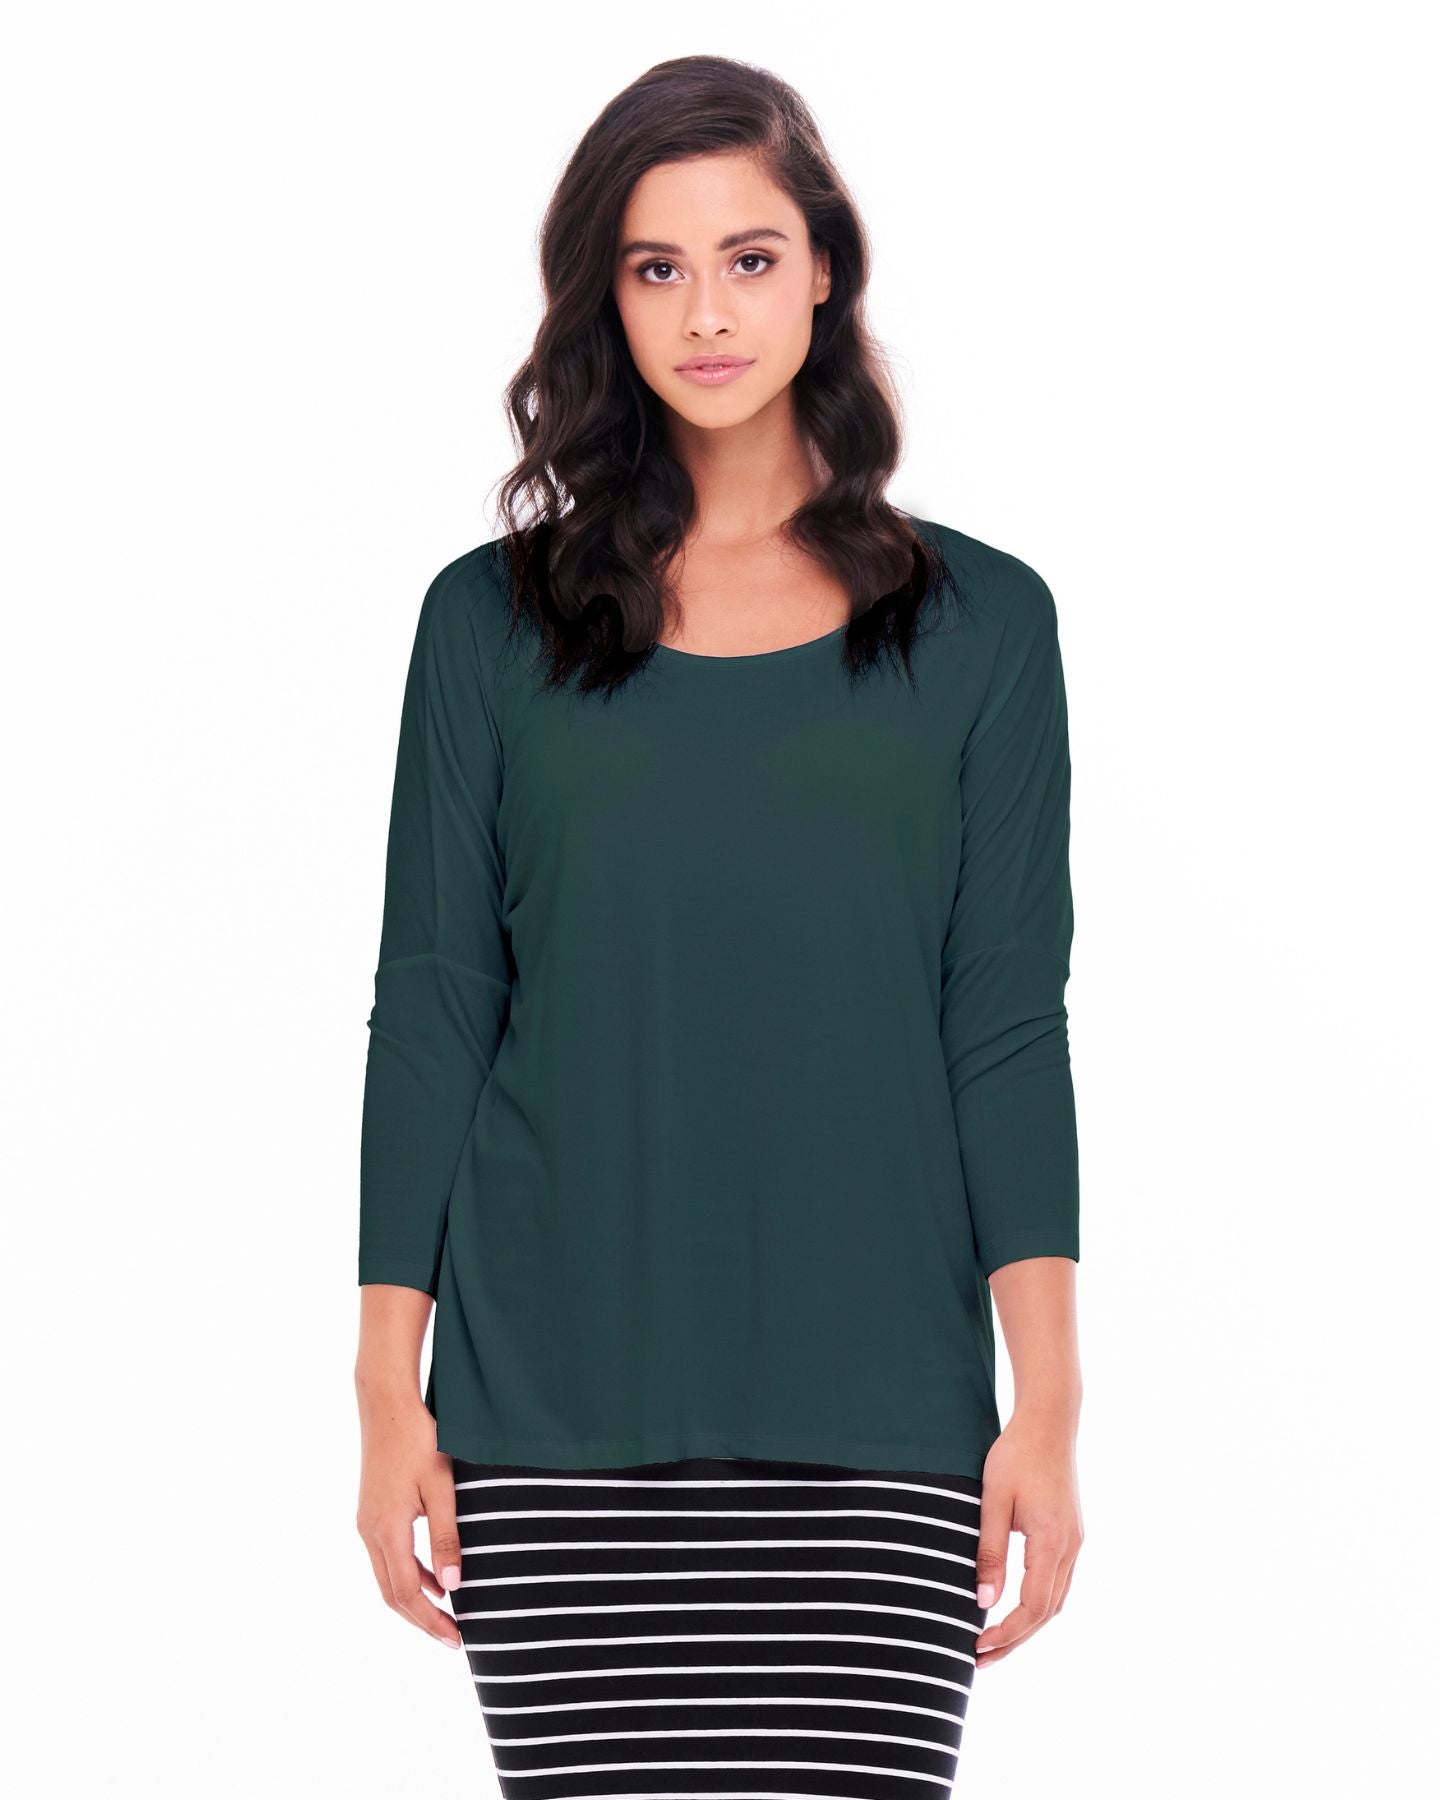 Milan Draped Relaxed 3/4 Sleeve Basic Top - Ivy